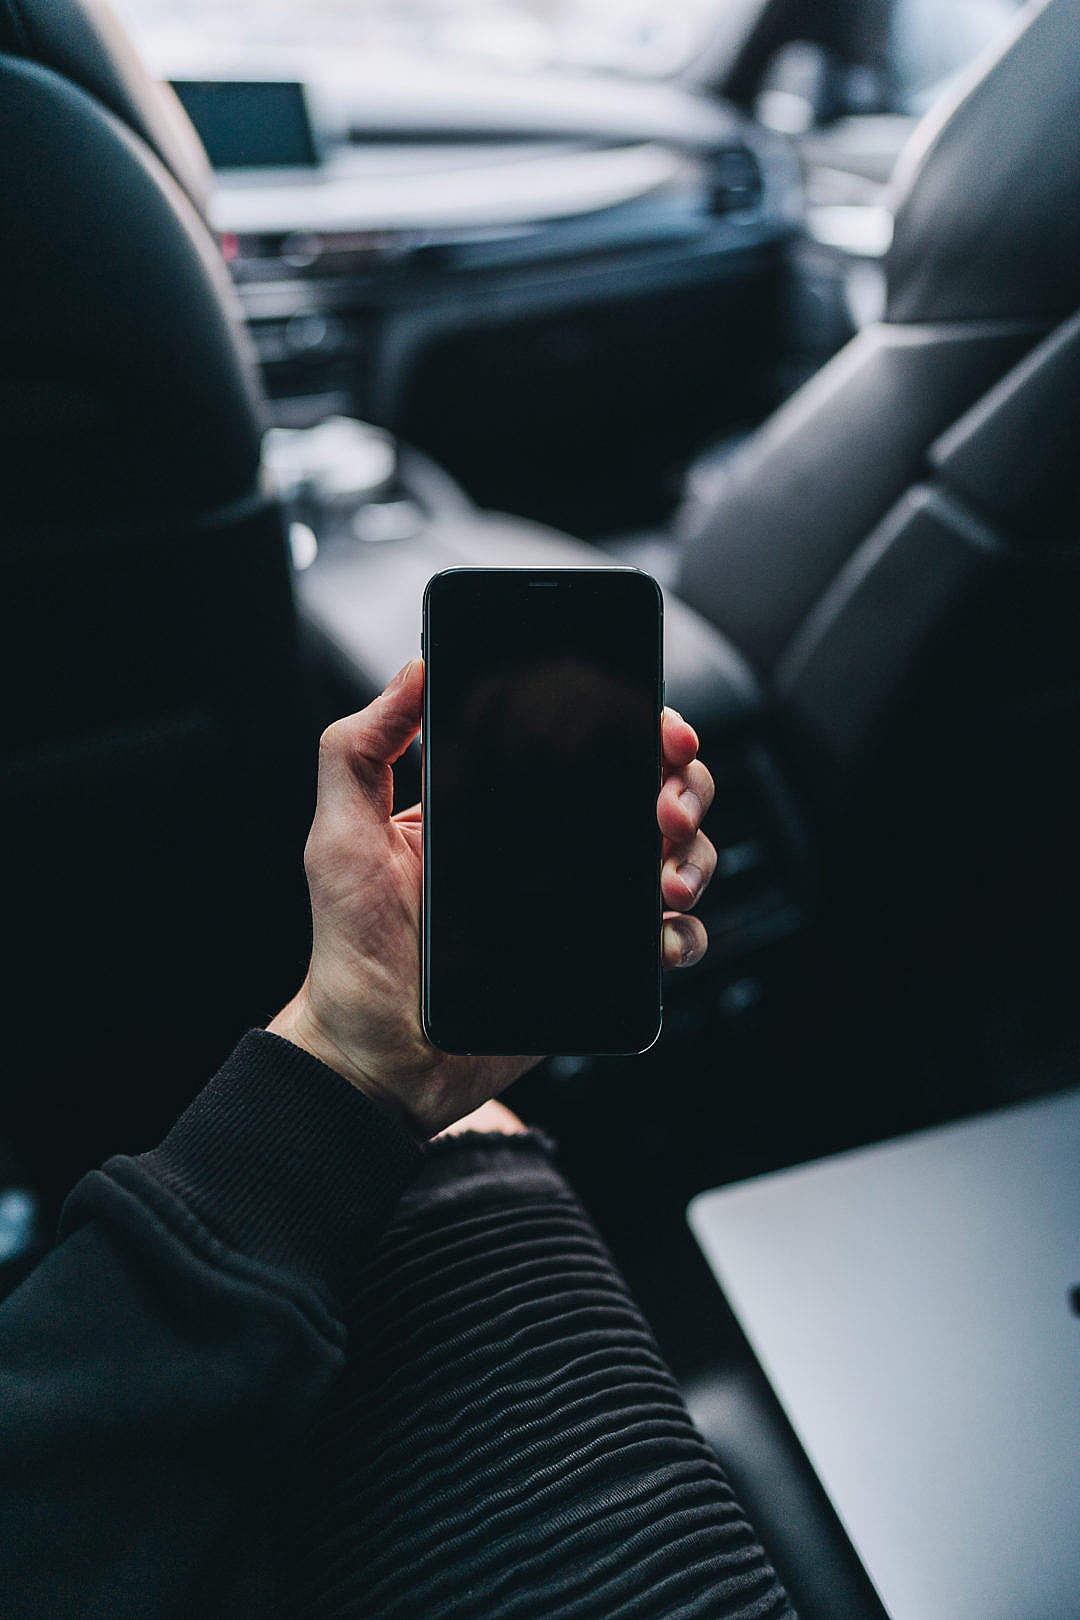 Man Sitting in a Car and Holding an iPhone